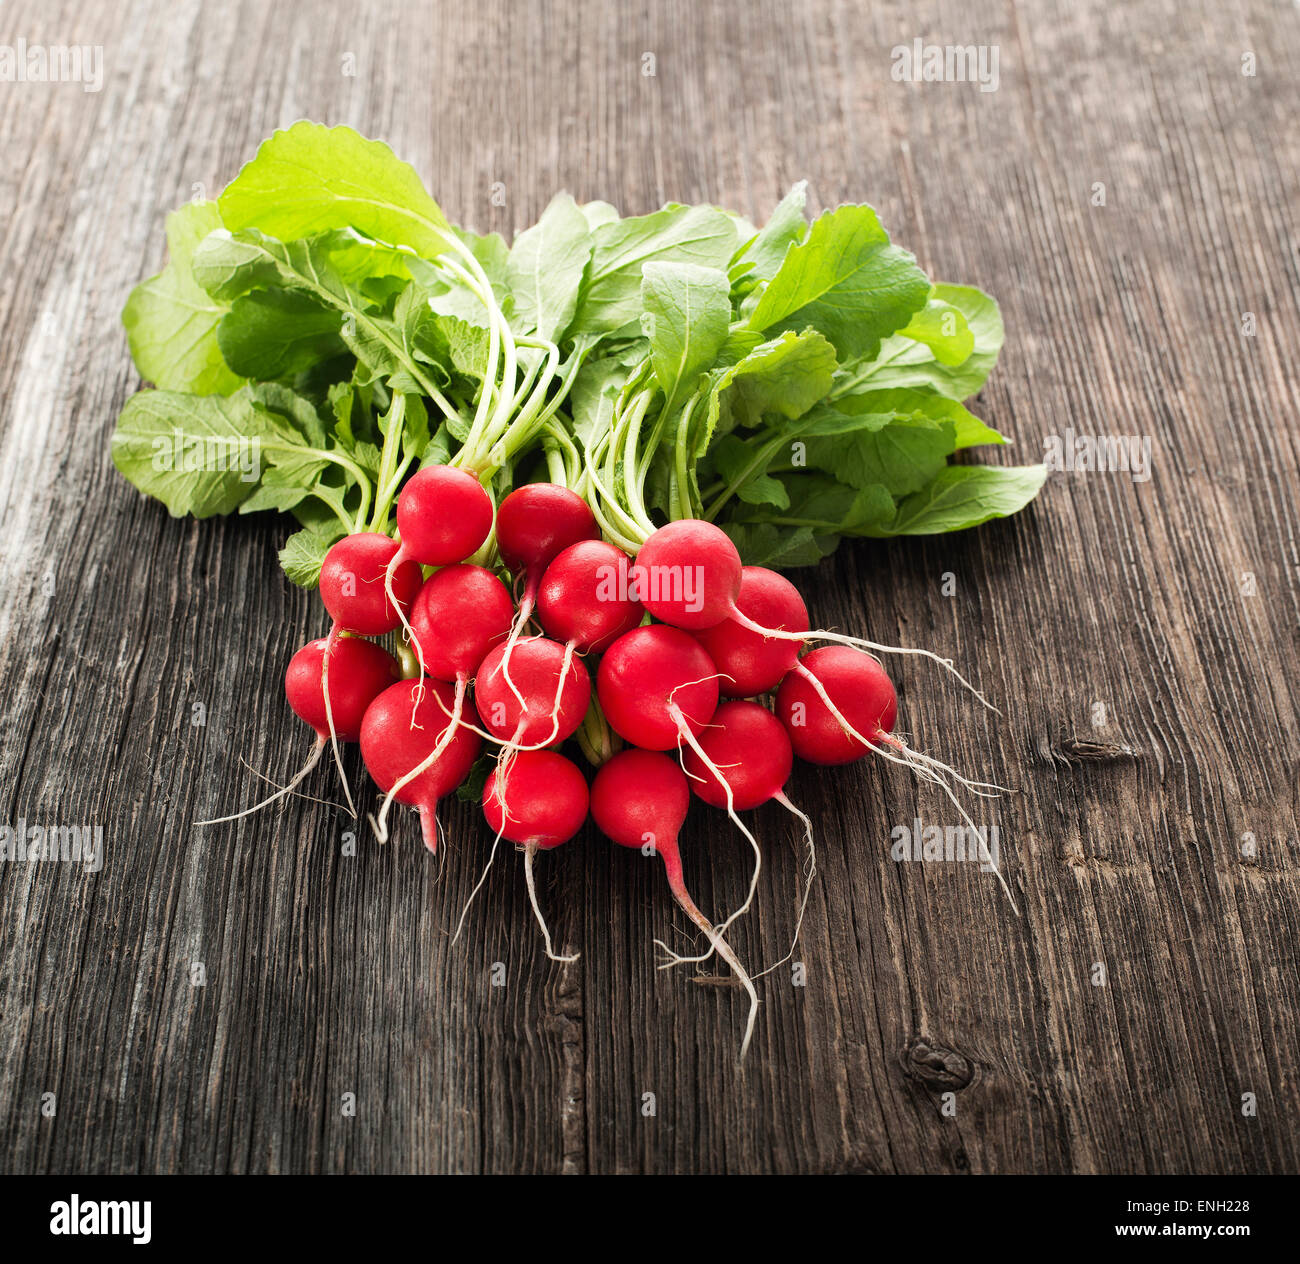 Bunch of fresh red radish on wooden table Stock Photo